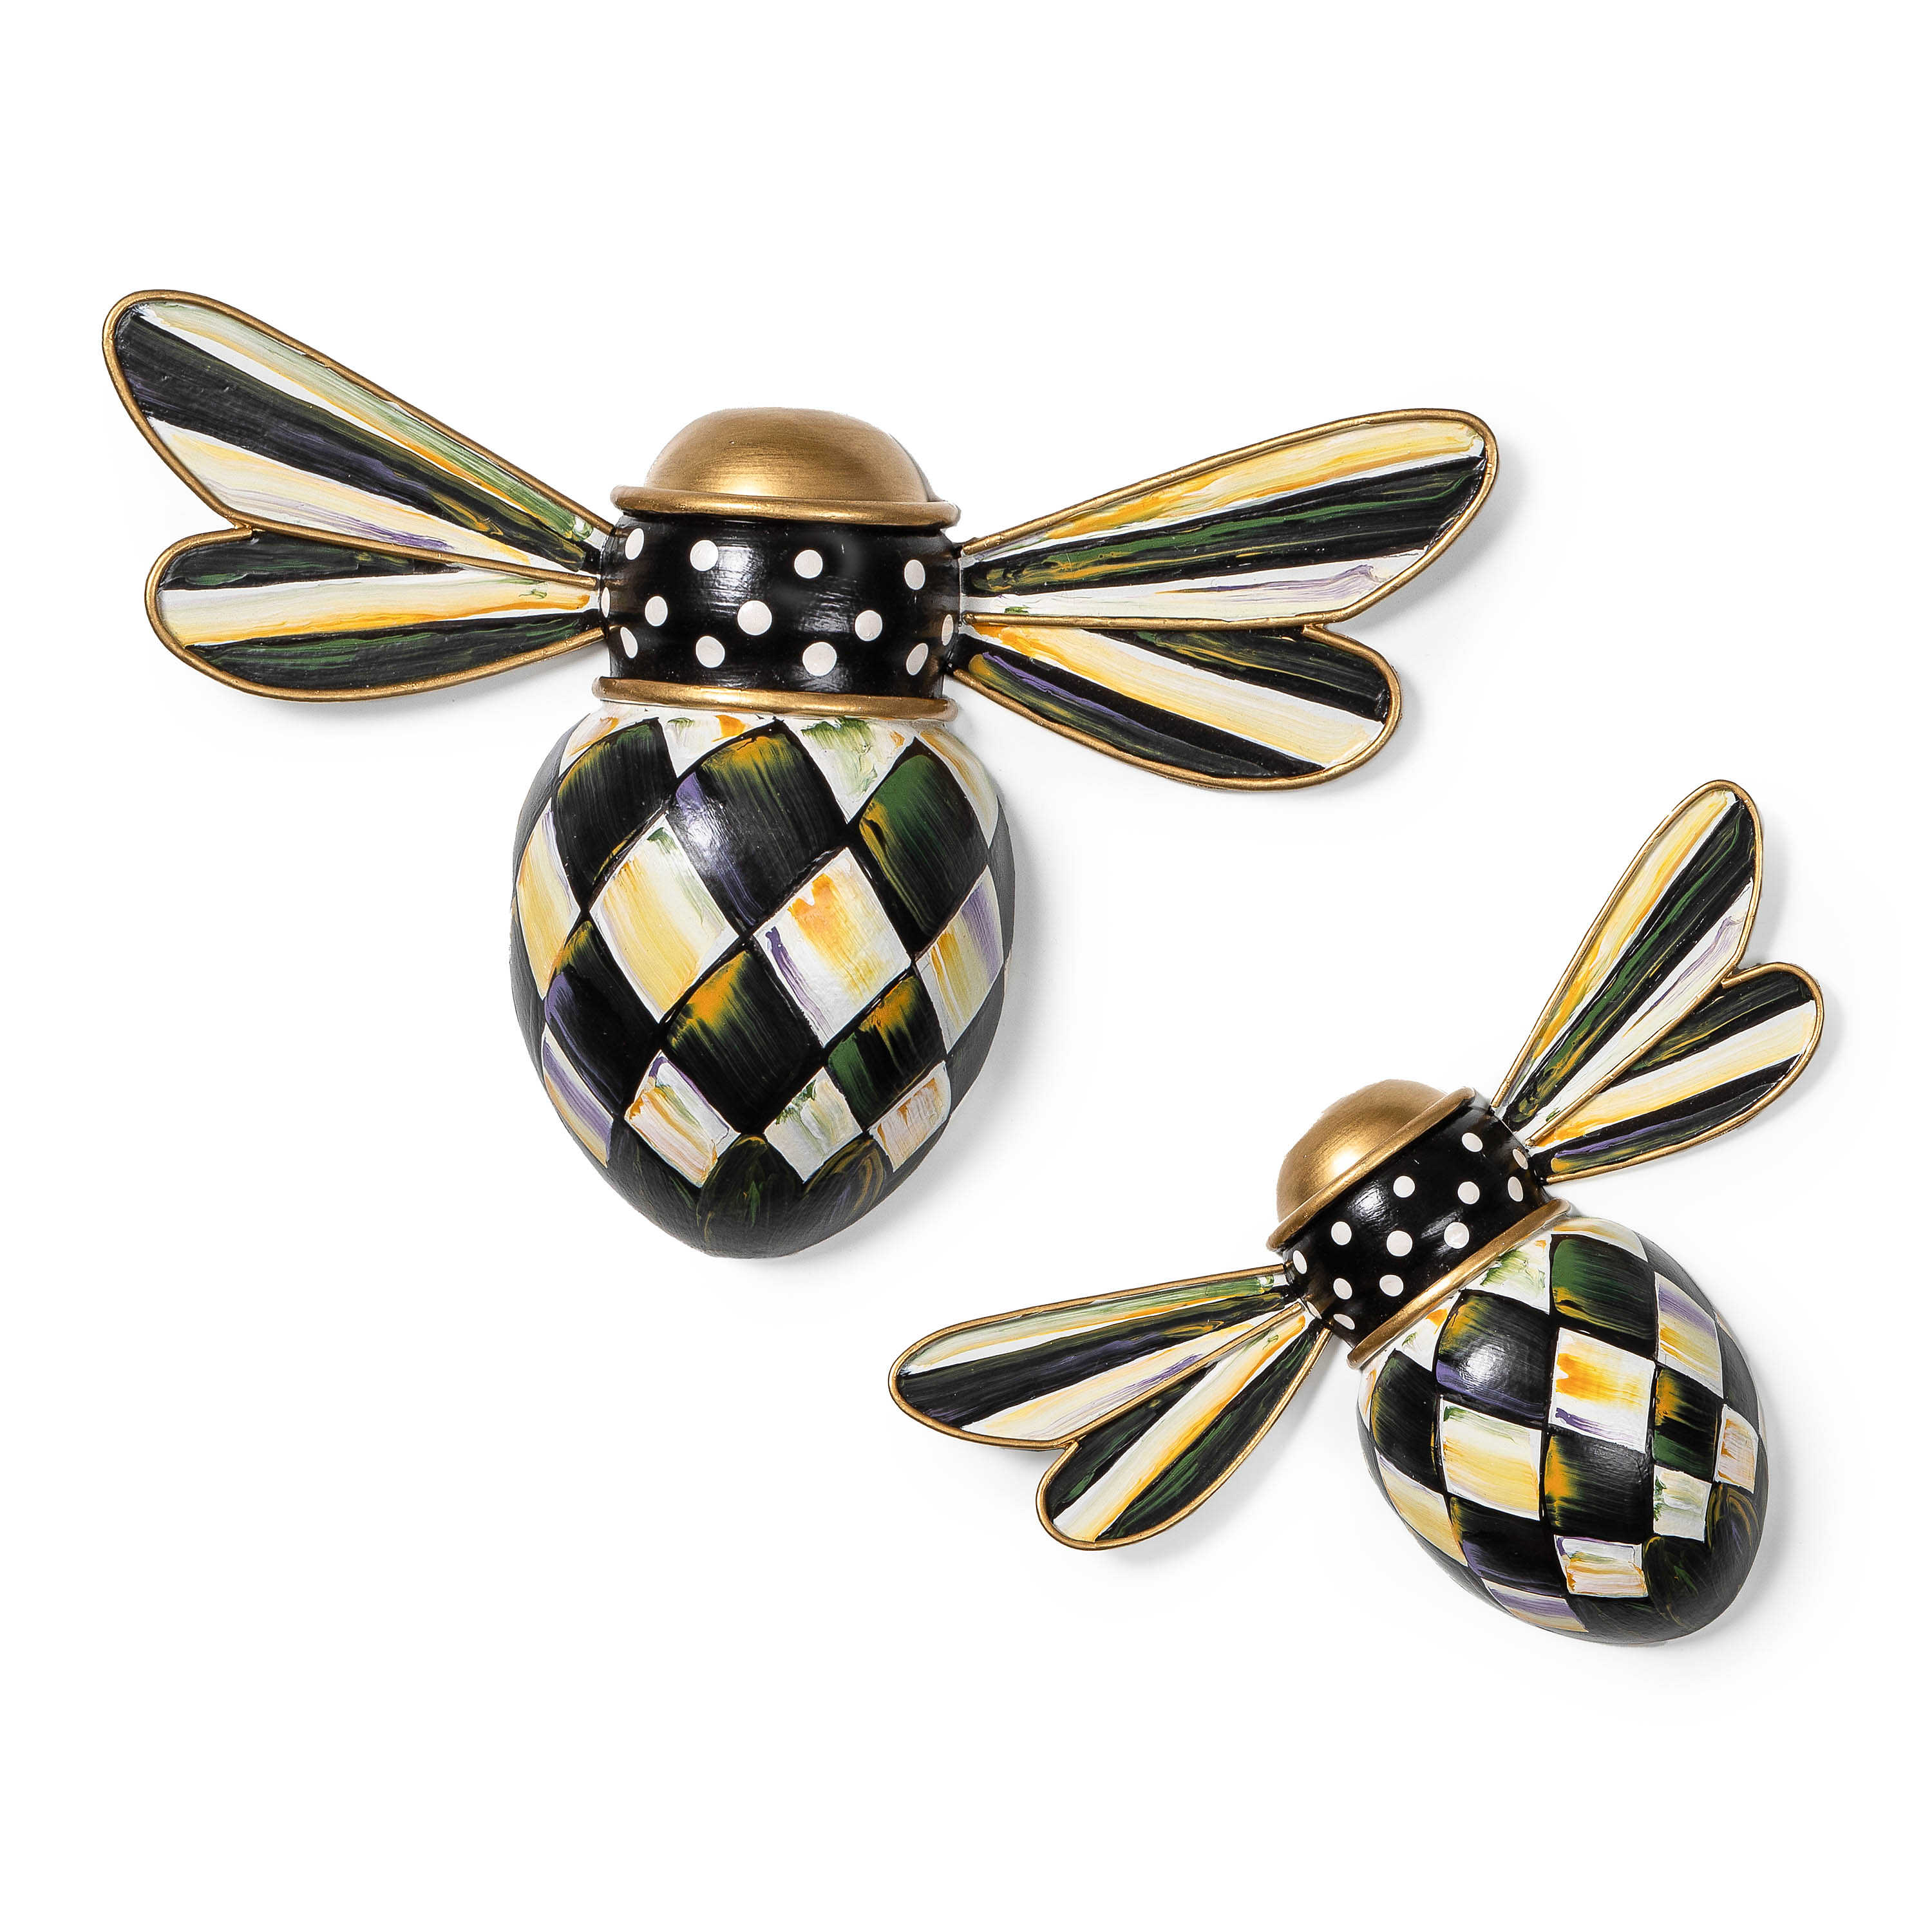 Courtly Check Outdoor Bee Wall Decor, Set of 2 mackenzie-childs Panama 0